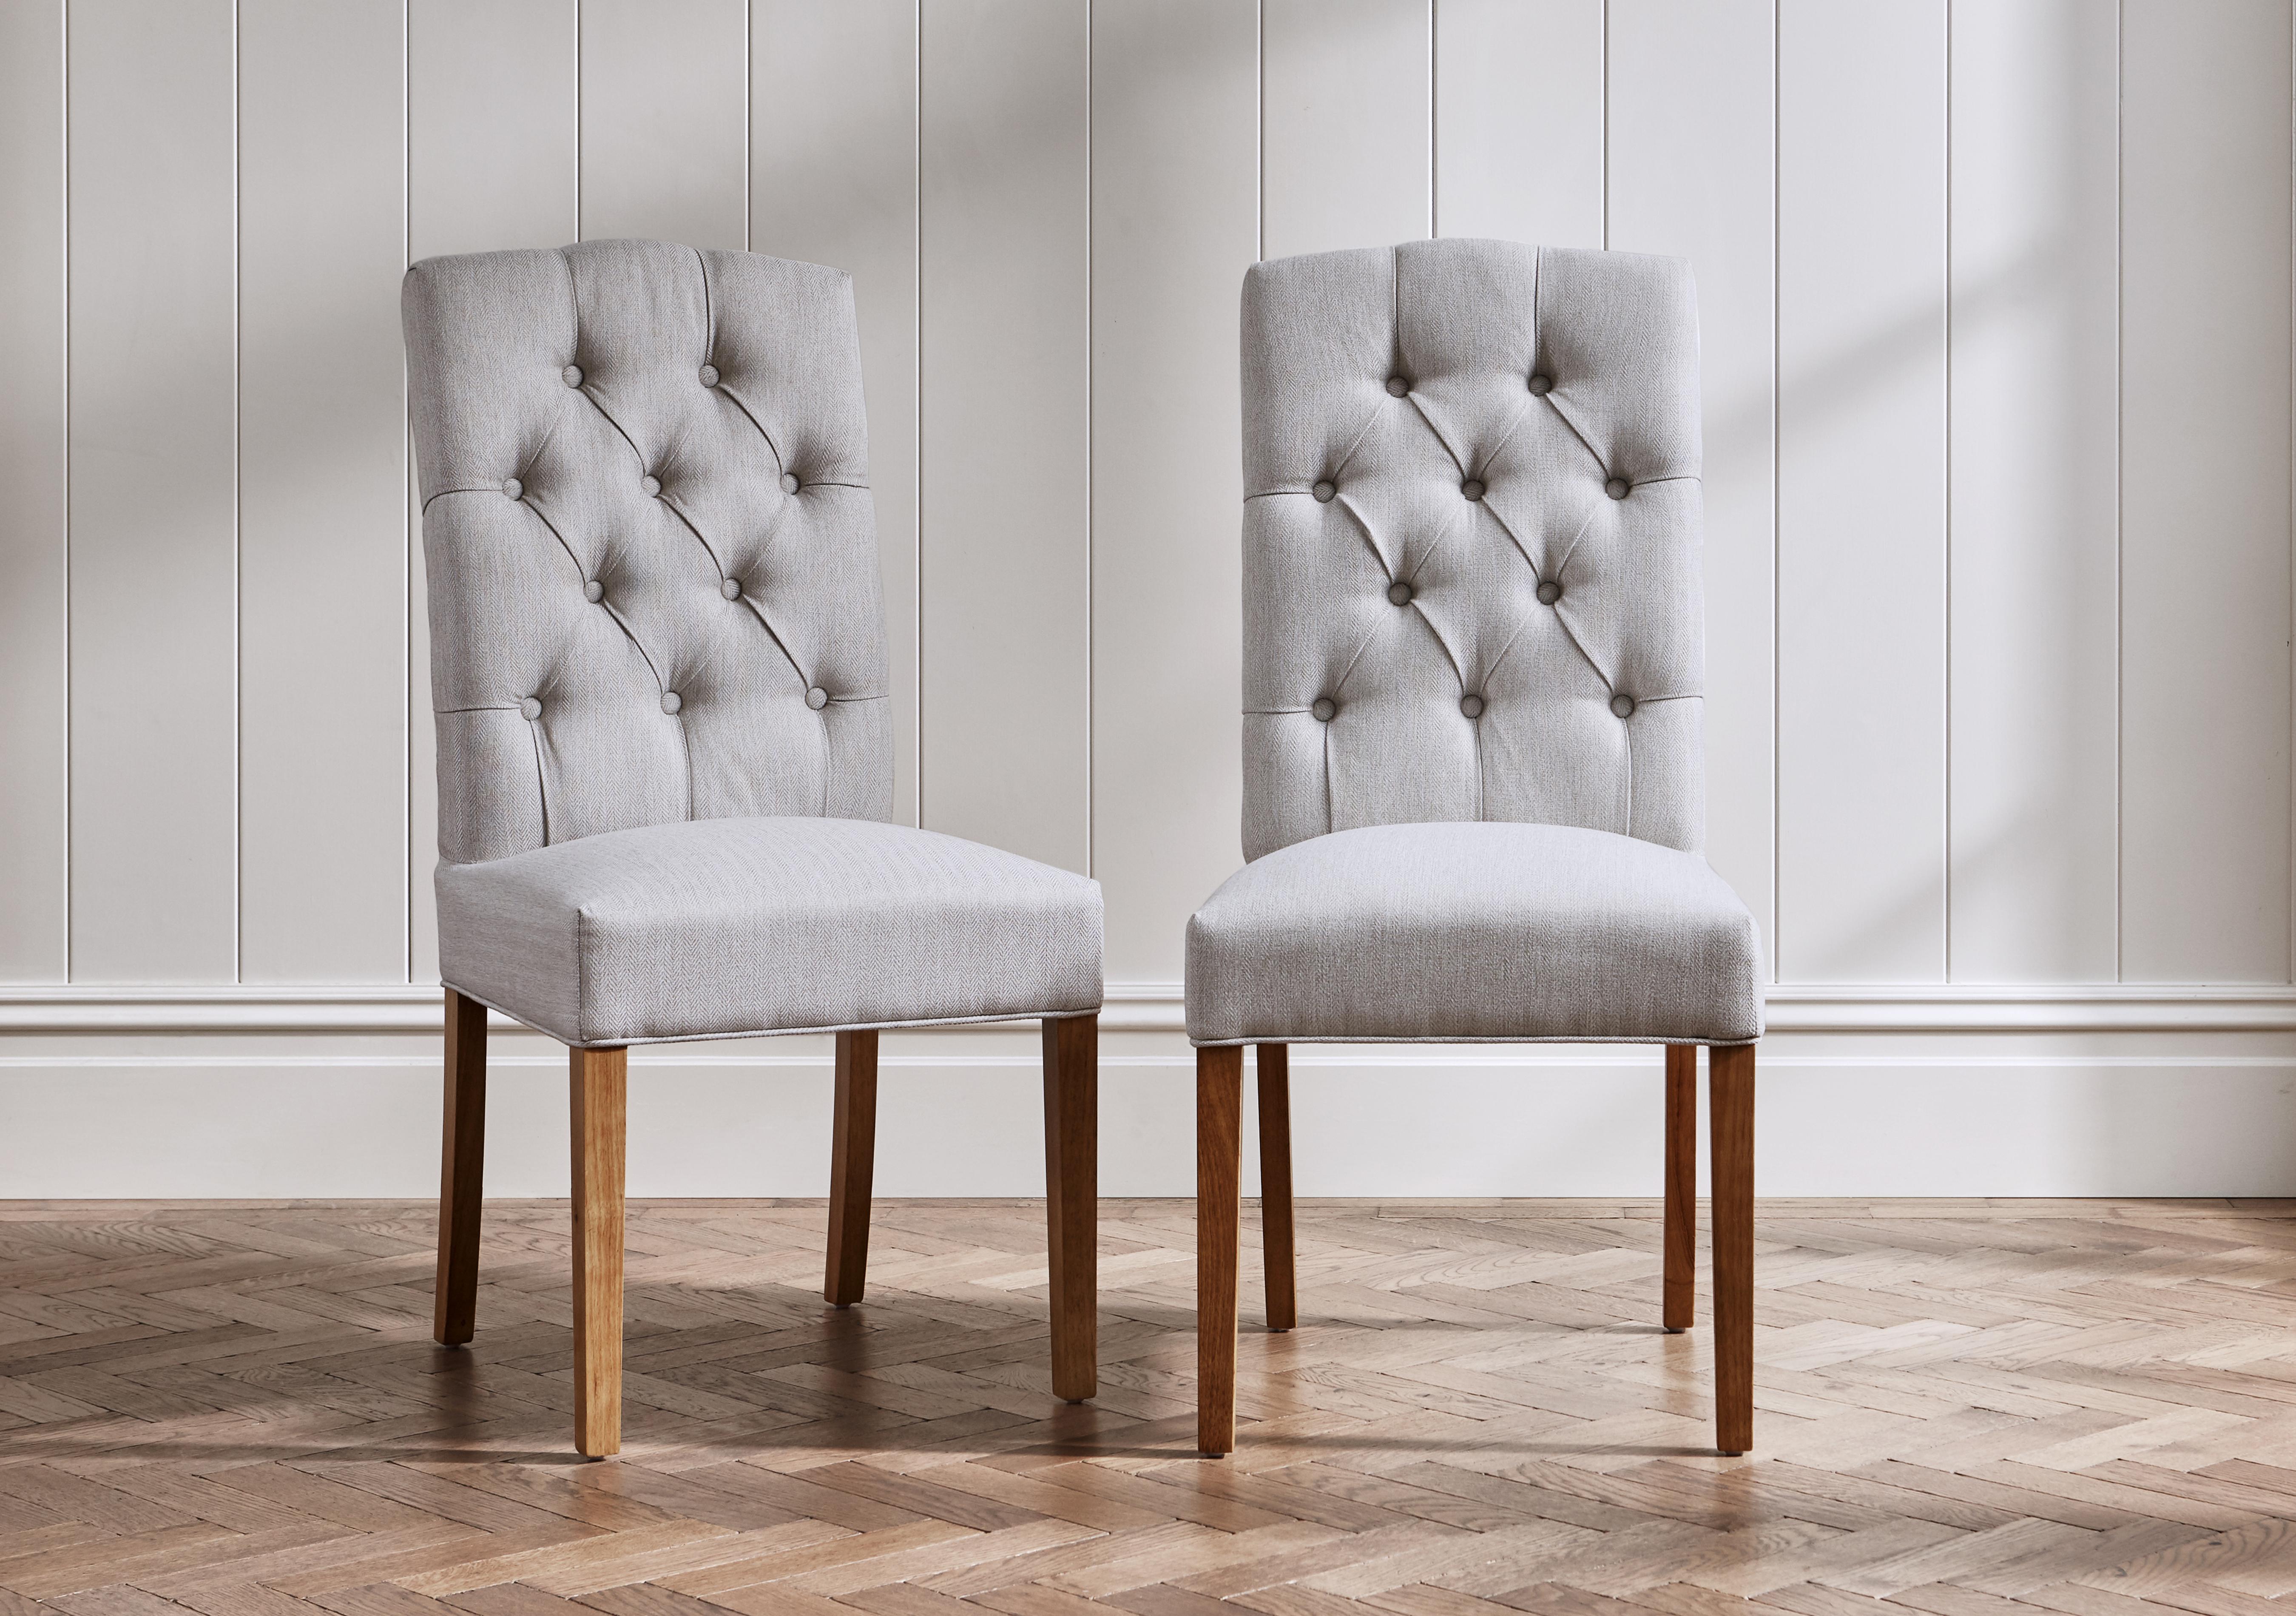 California Pair of Button Back Upholstered Dining Chairs in  on Furniture Village